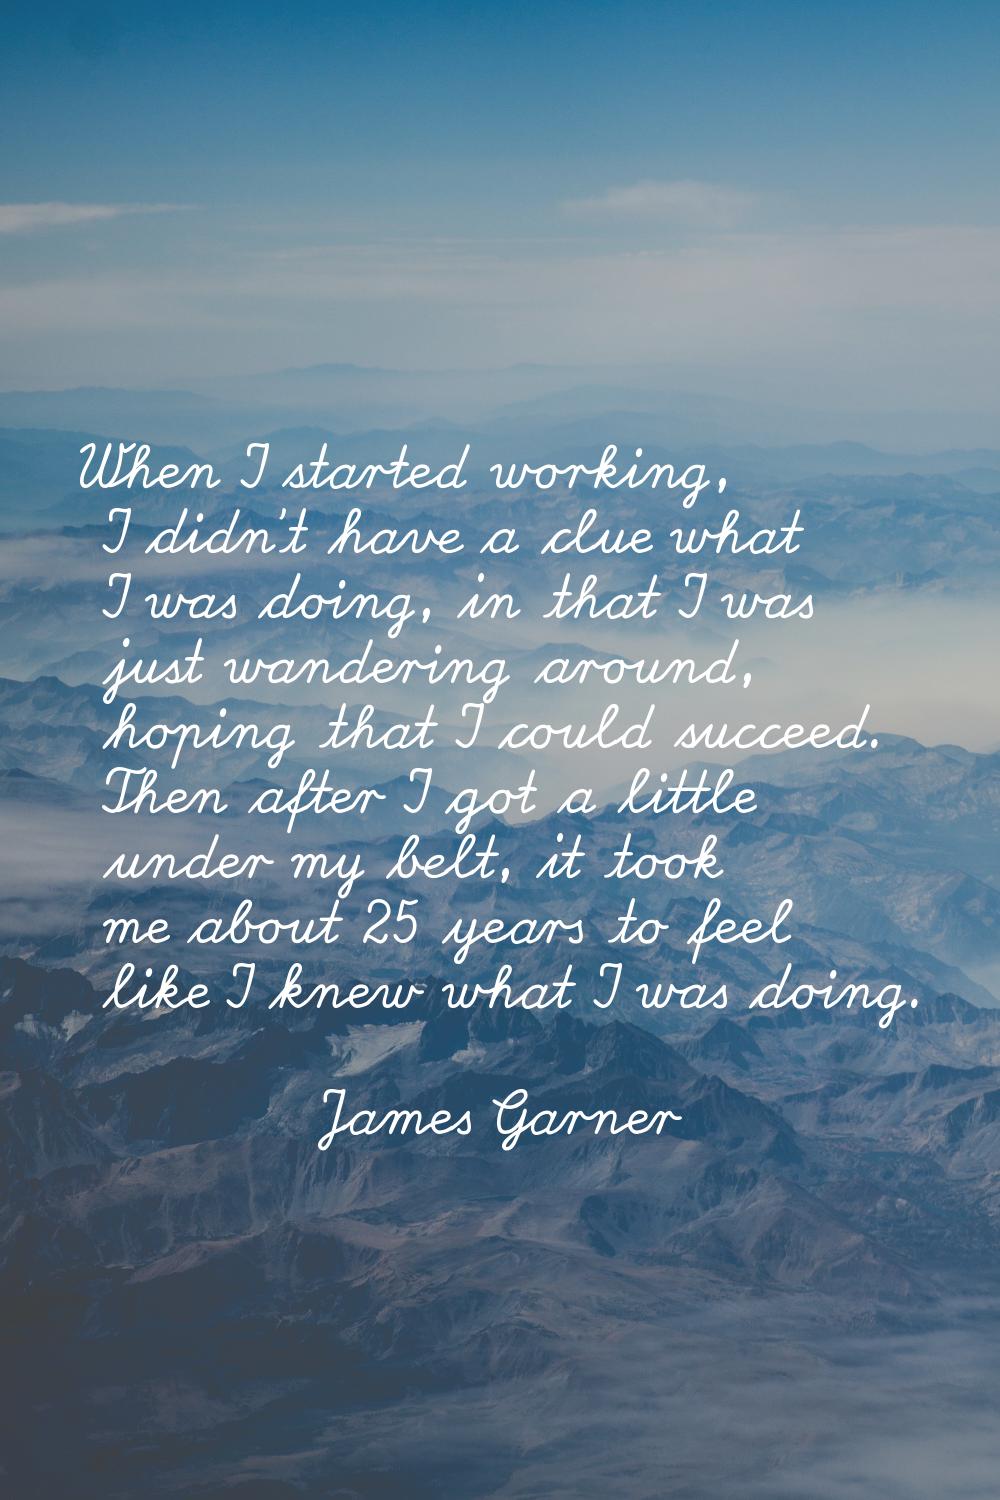 When I started working, I didn't have a clue what I was doing, in that I was just wandering around,